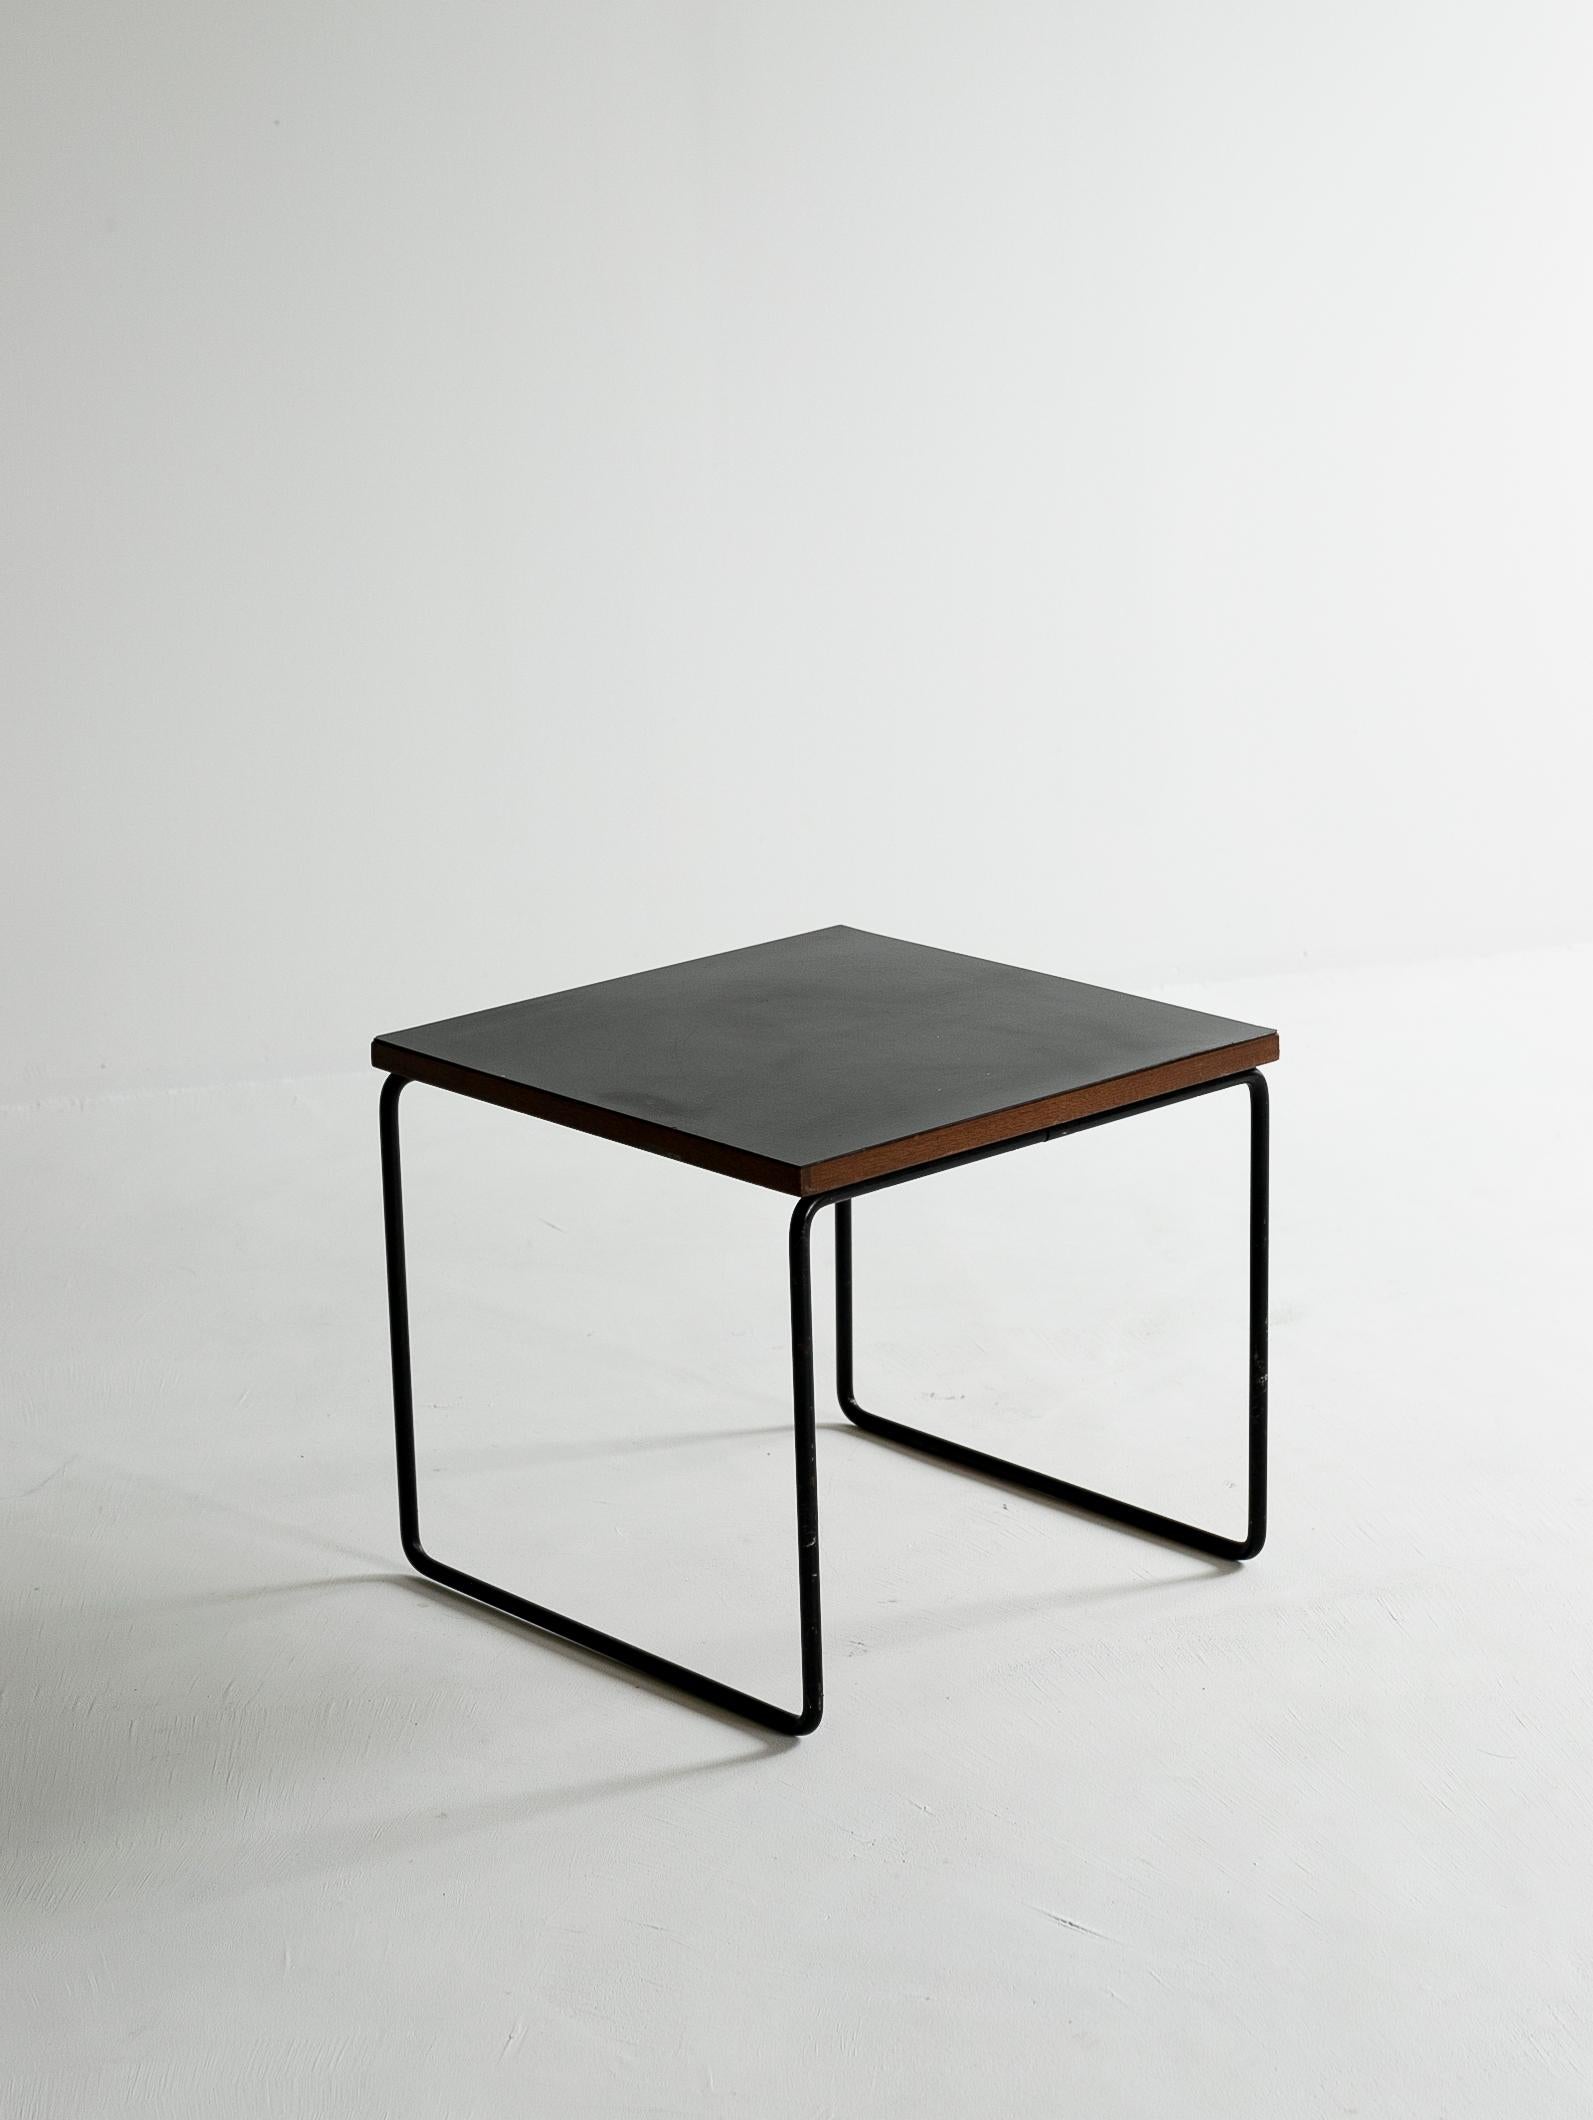 French Pierre Guariche ”VOLANTE” Table for Steiner, 1950s